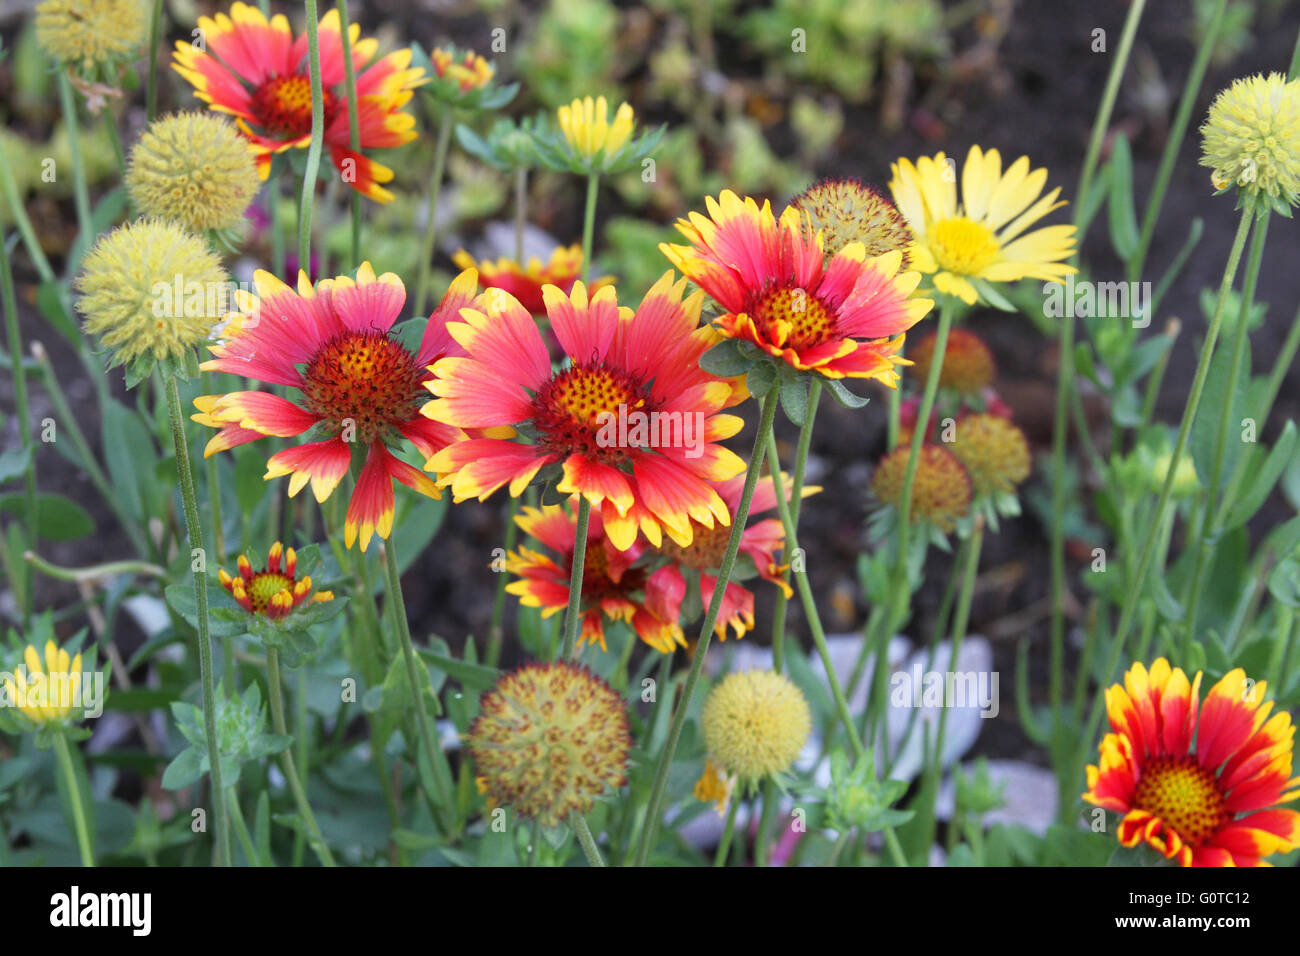 Group of blanket flowers, gaillardia, and seed heads in a garden in Peru Stock Photo